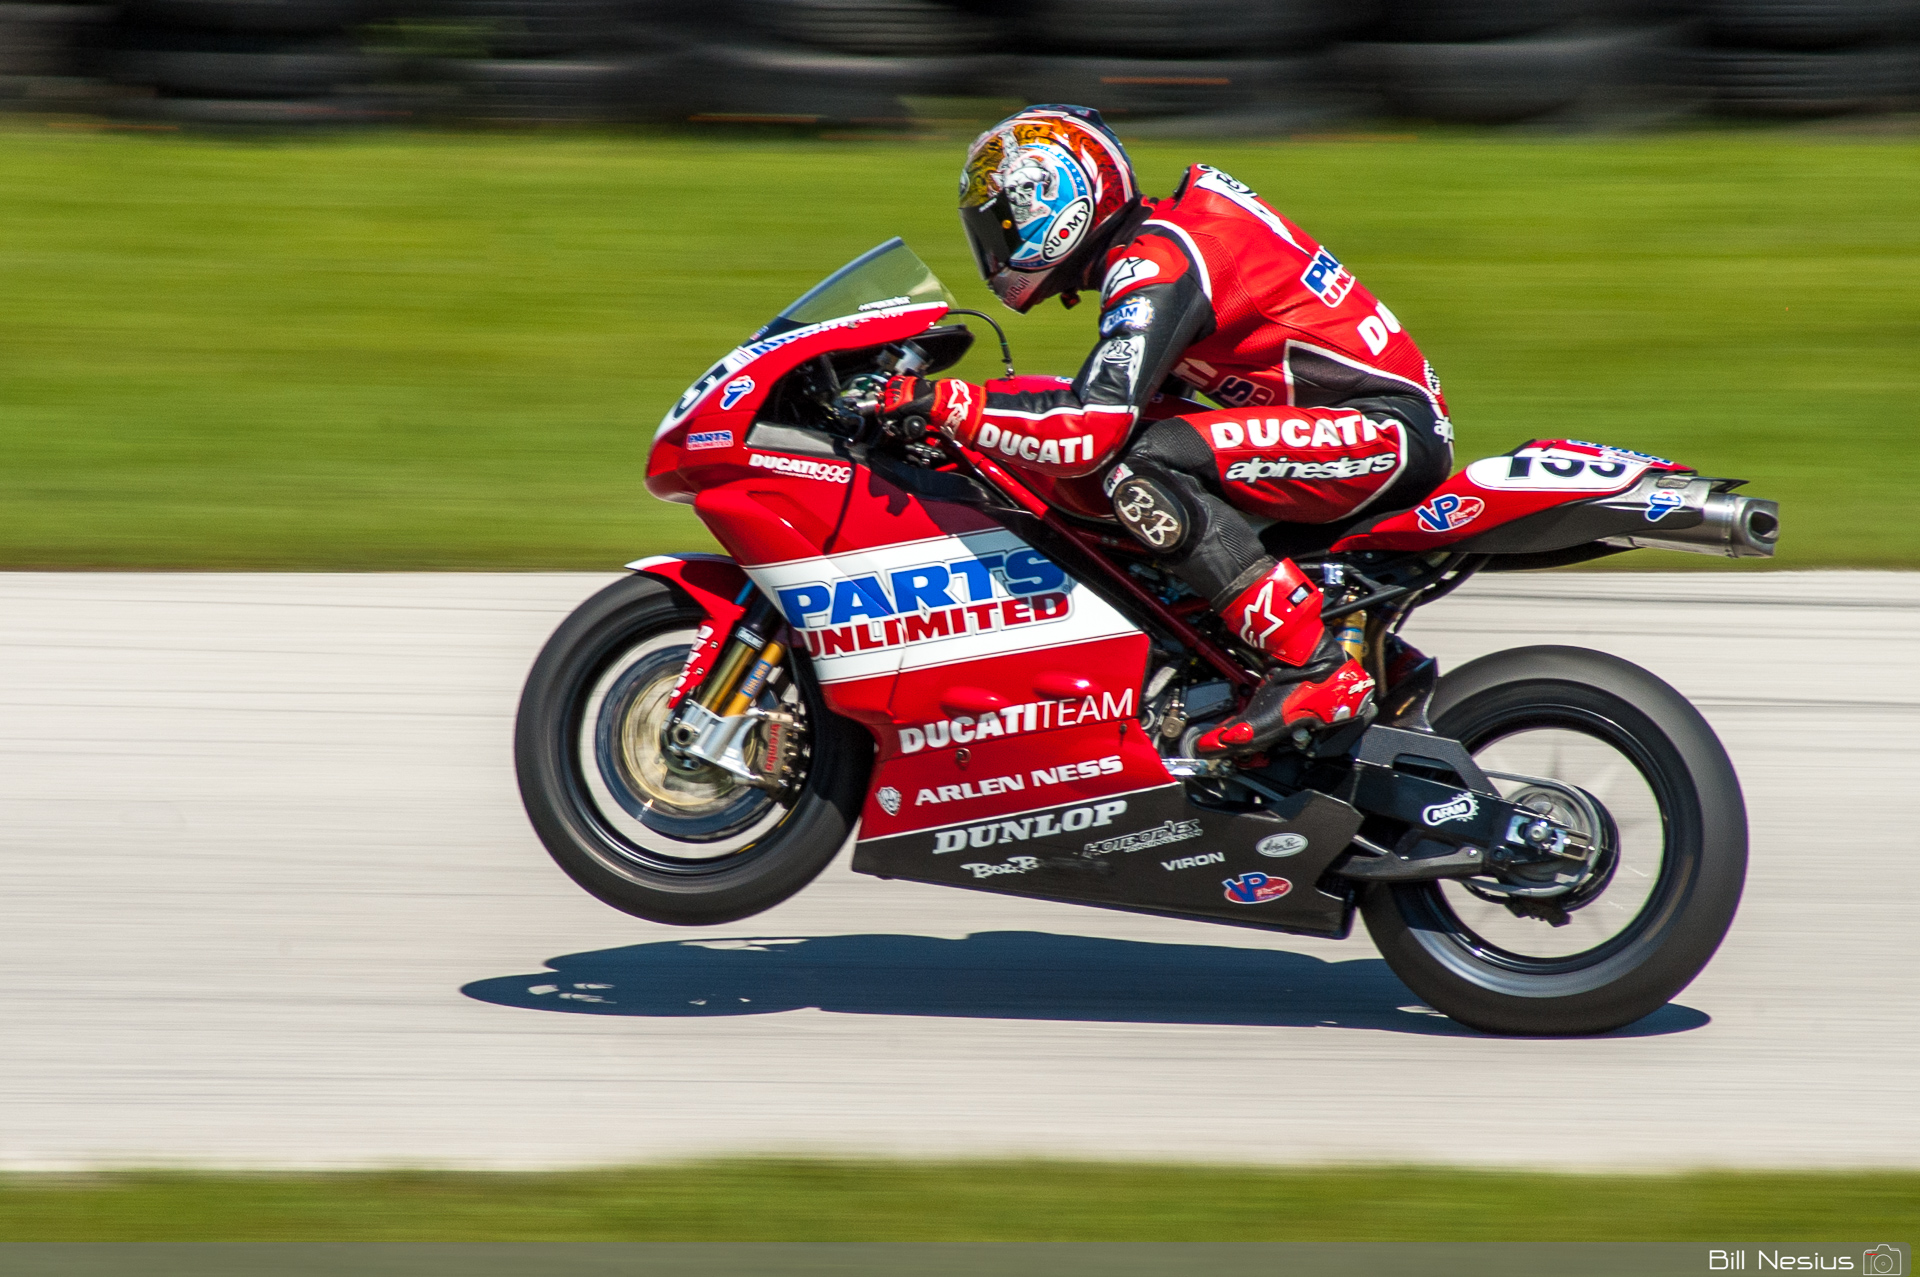 Ben Bostrom on the Number 155 Parts Unlimited Ducati 999R / DSC_1455 / 5